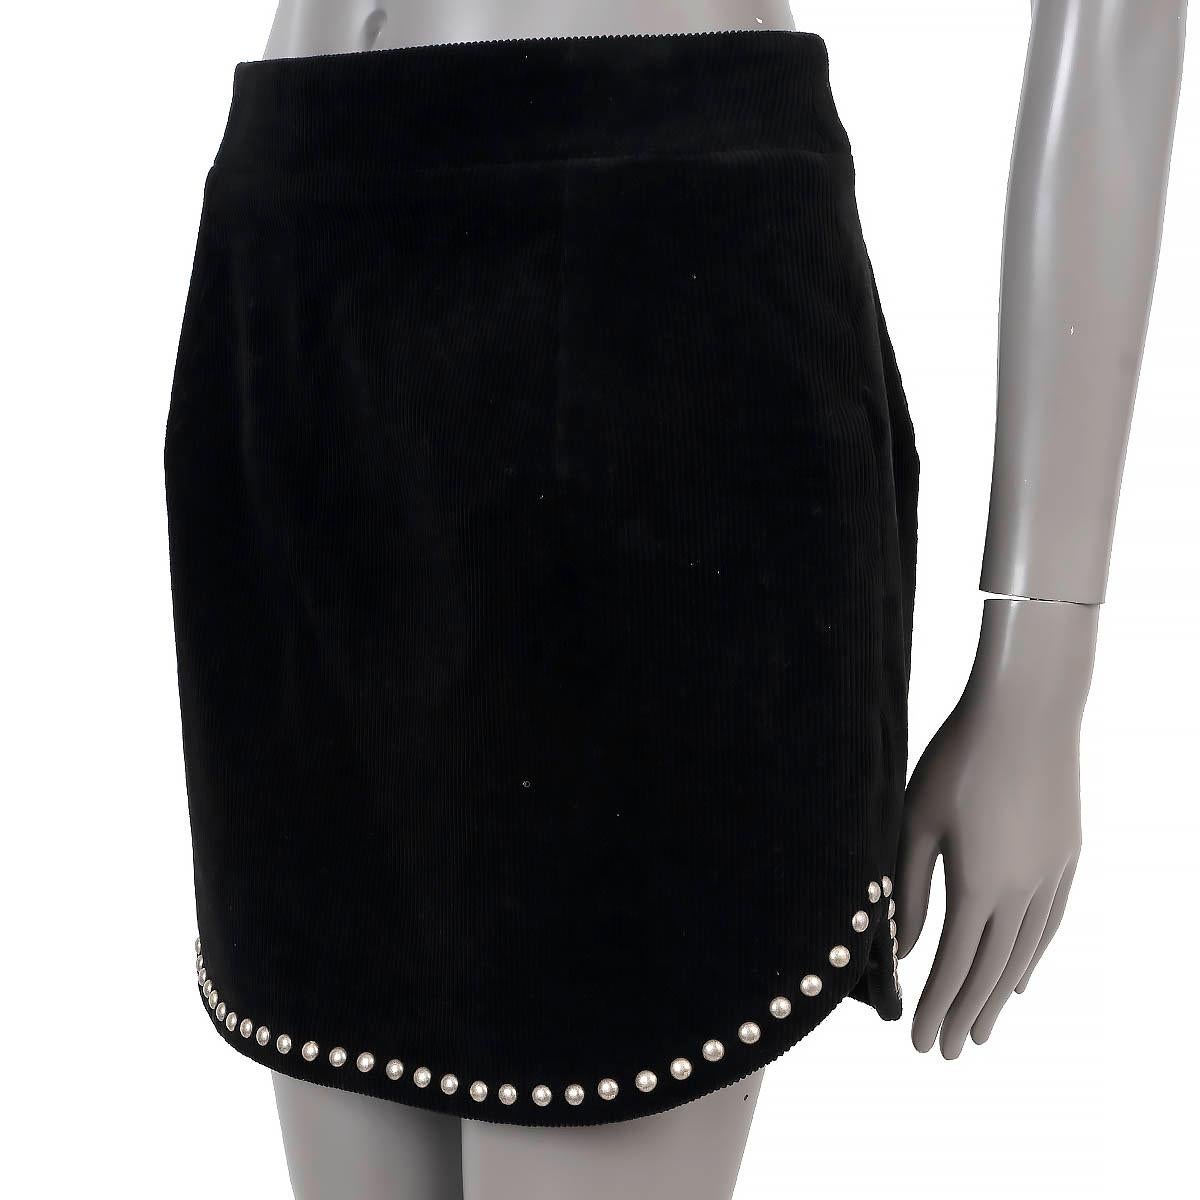 100% authentic Saint Laurent studded skirt in black cotton corduroy (100%) and nylon (4%). Features silver studded at the hem and two pocket on the side. Closes with one hooks and invisible zipper on the back. Lined in black silk (100%). Has been